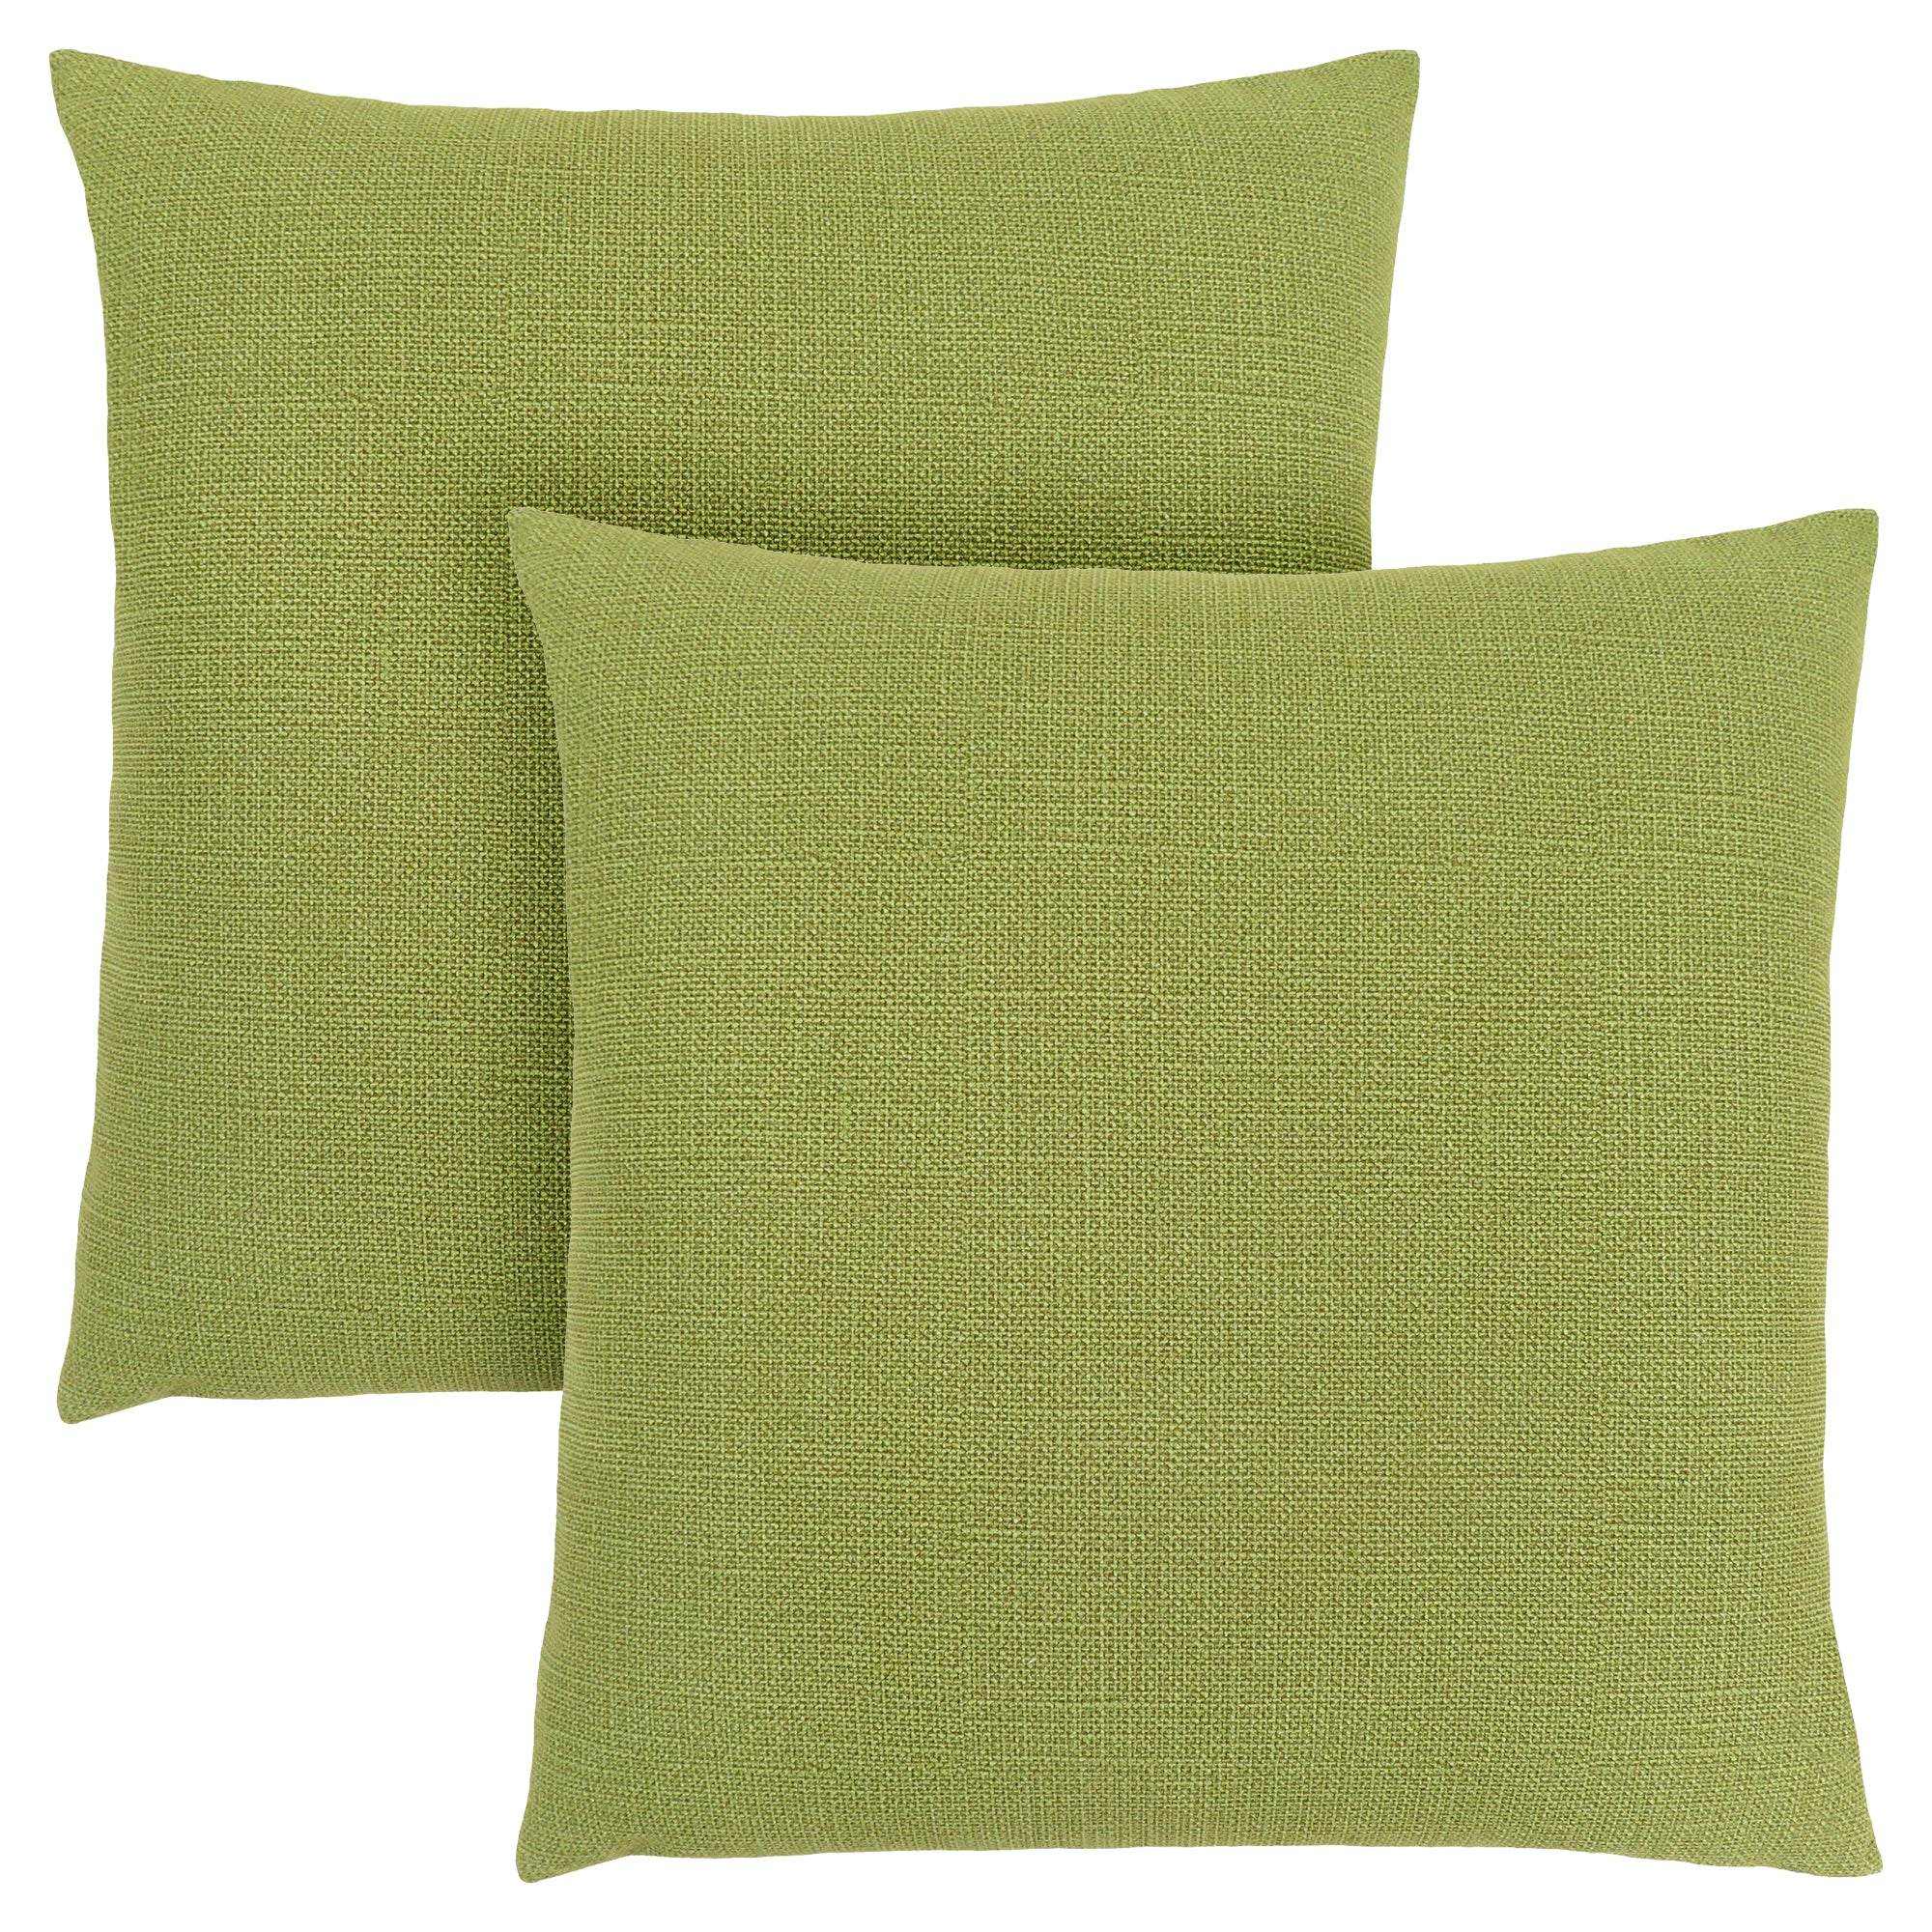 MN-829293    Pillows, Set Of 2, 18 X 18 Square, Insert Included, Decorative Throw, Accent, Sofa, Couch, Bed, Cozy Textured-Look, Soft Polyester Fabric, Hypoallergenic Soft Polyester Insert, Lime Green, Classic